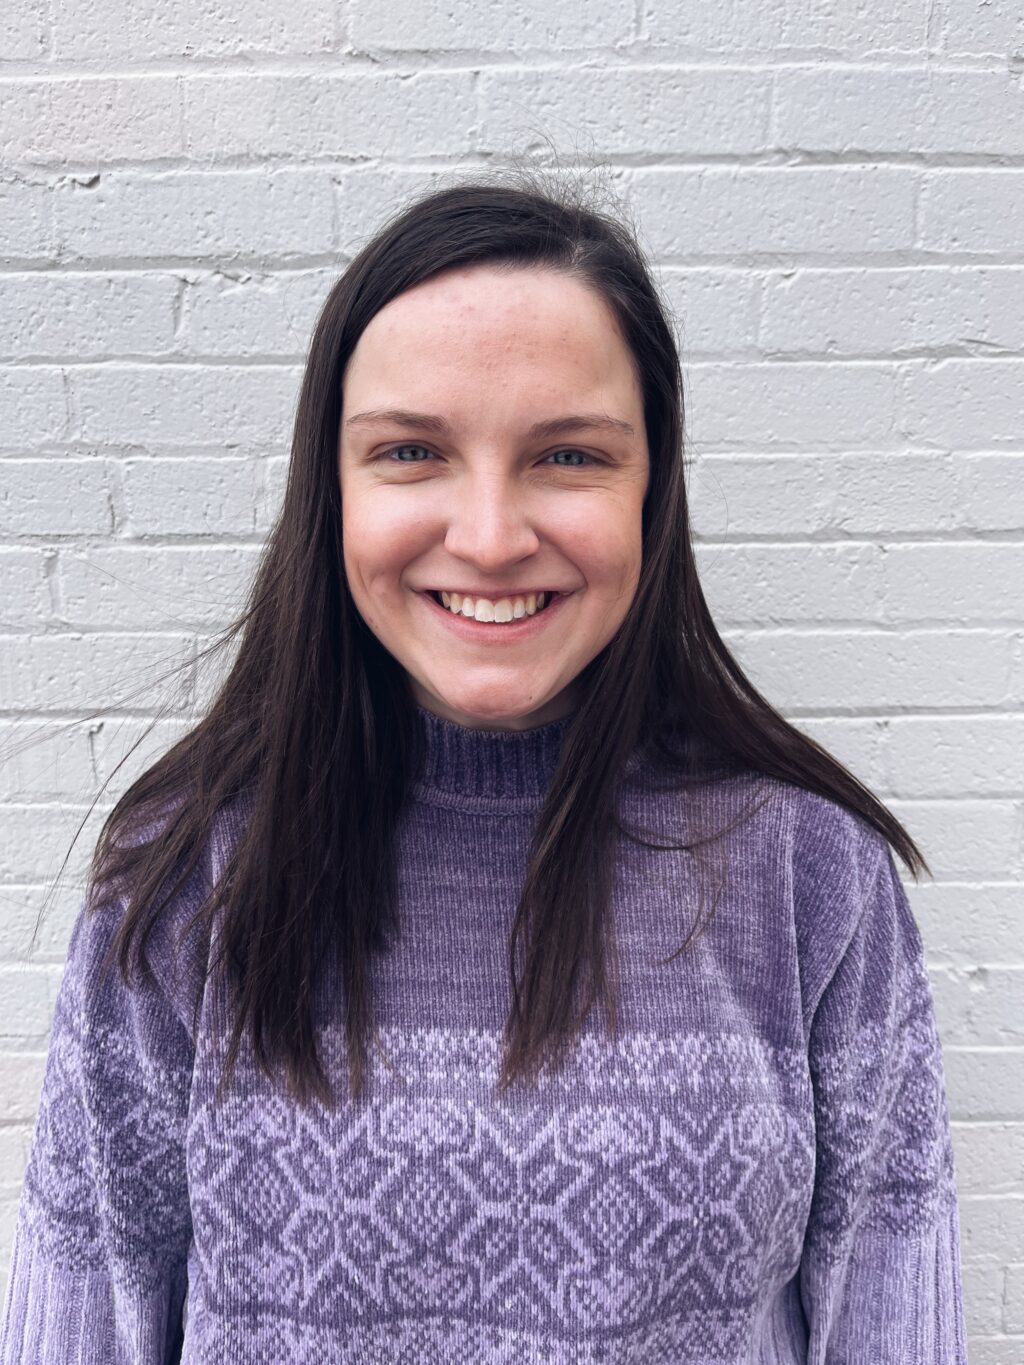 A girl with dark hair and a purple sweater is smiling at the camera.